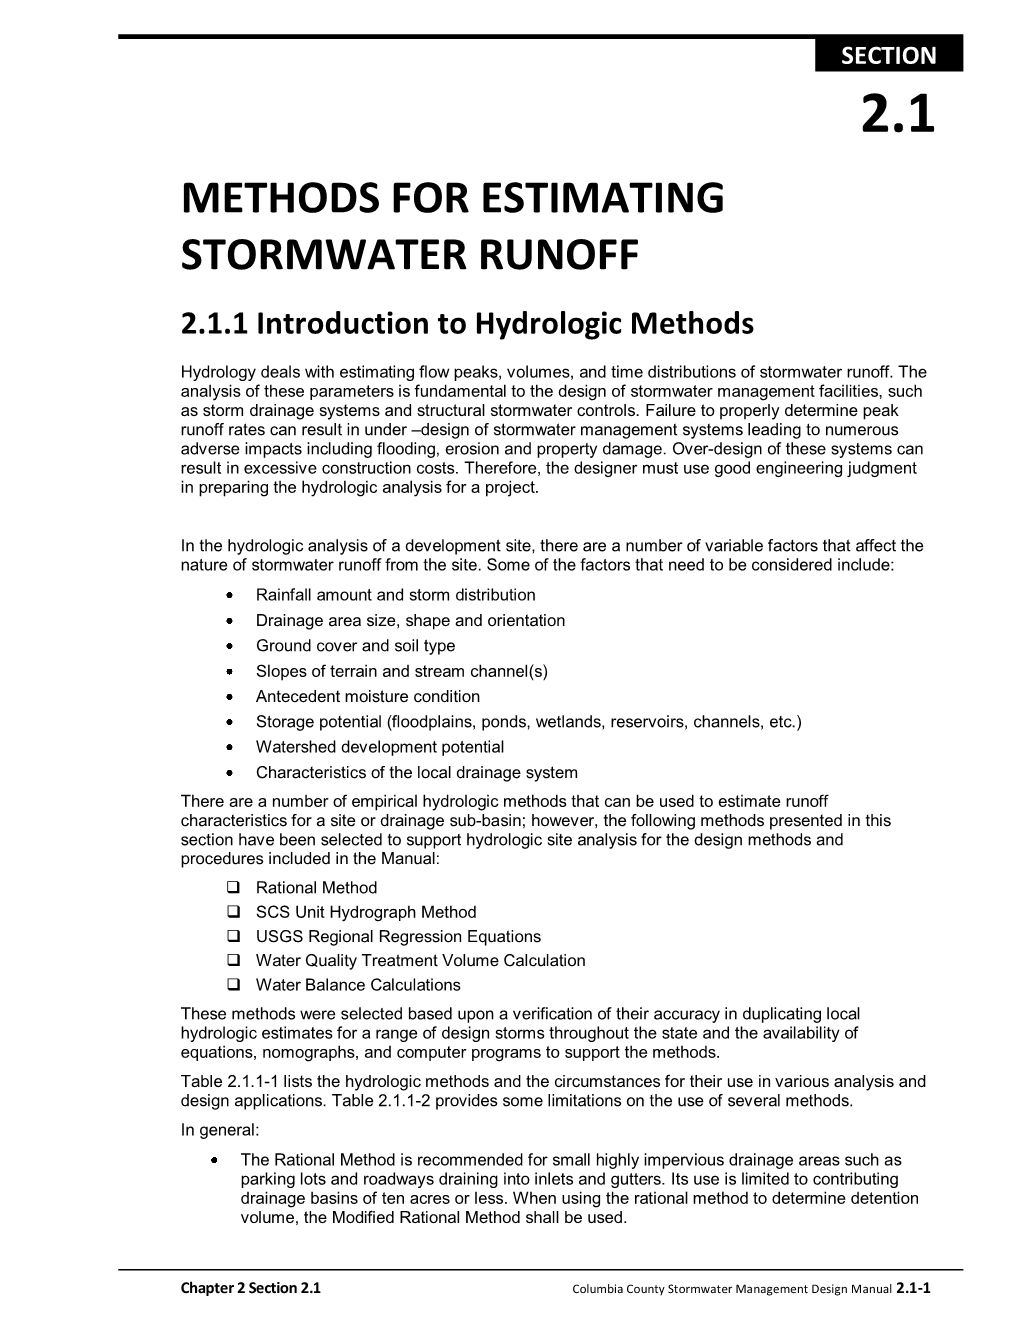 METHODS for ESTIMATING STORMWATER RUNOFF 2.1.1 Introduction to Hydrologic Methods